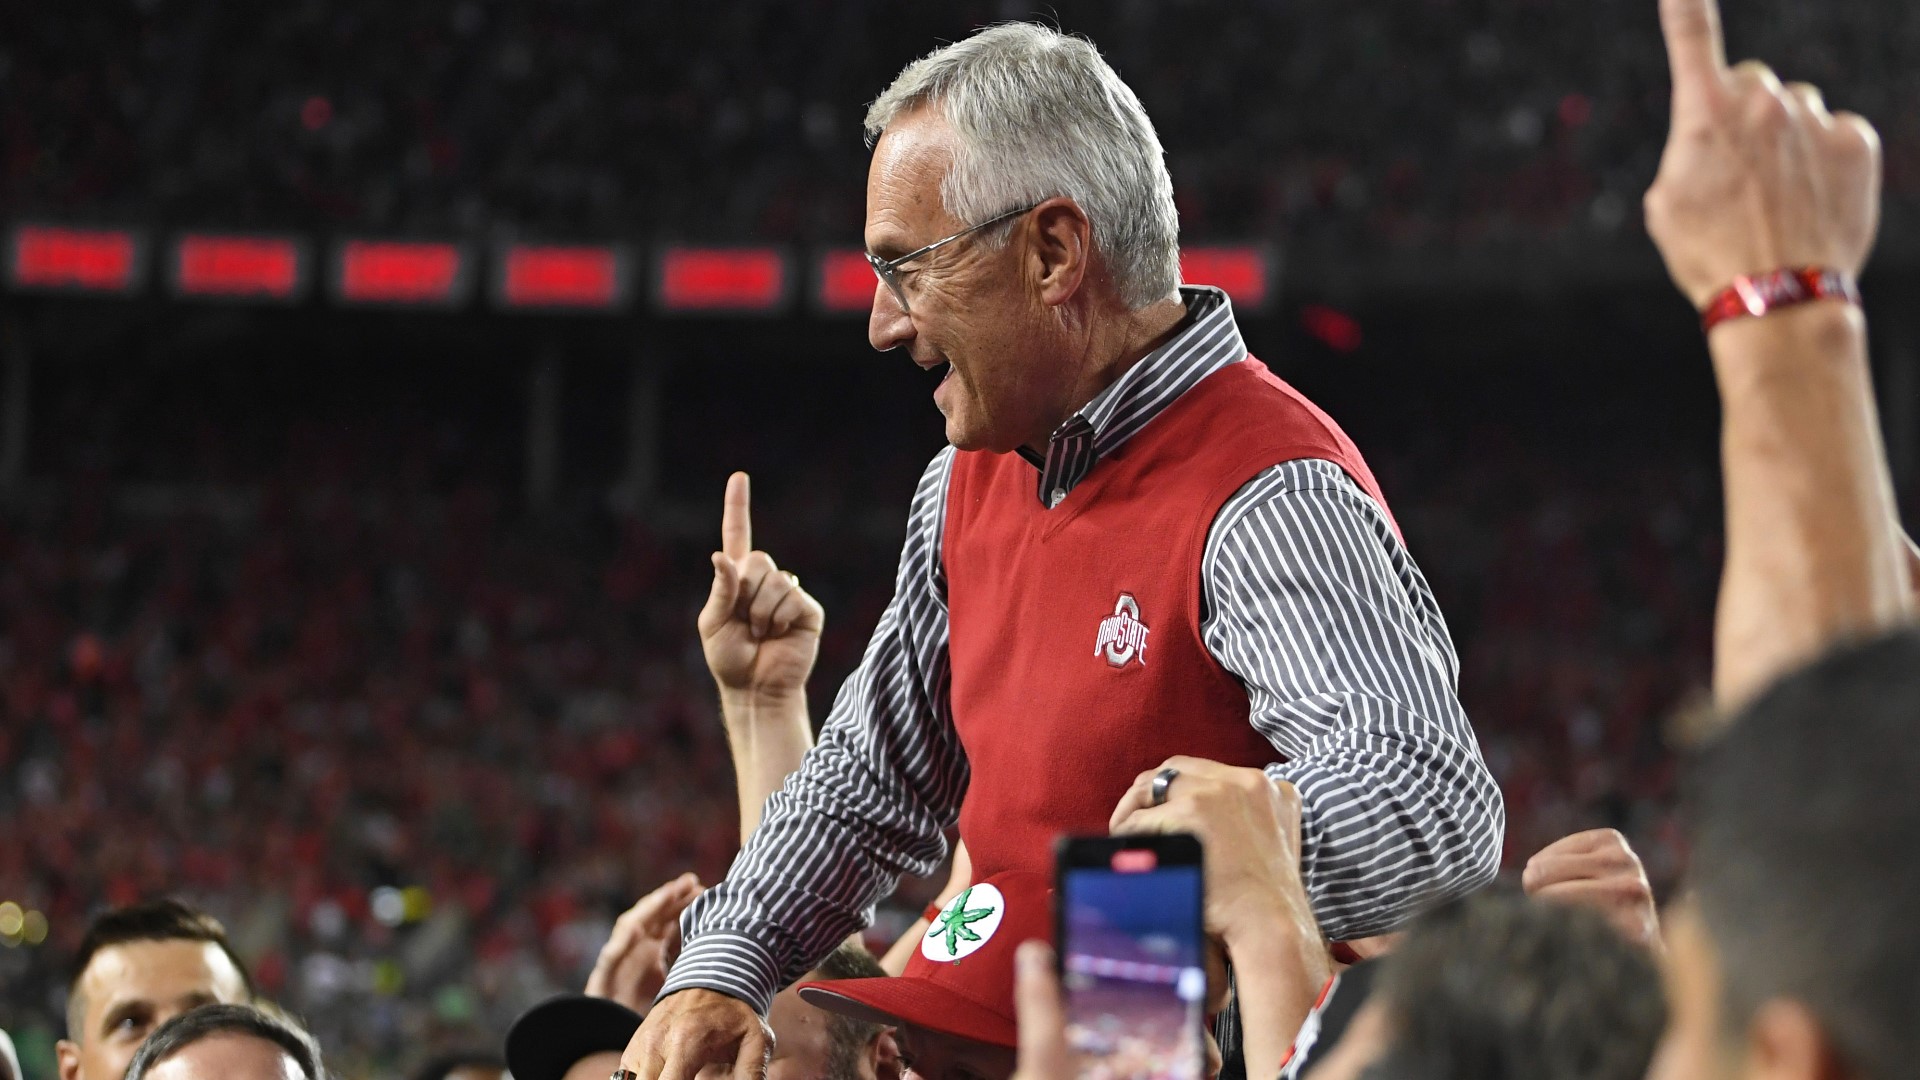 Former Ohio State head coach Jim Tressel and 2002 national championship team was honored Saturday at the game against Notre Dame.